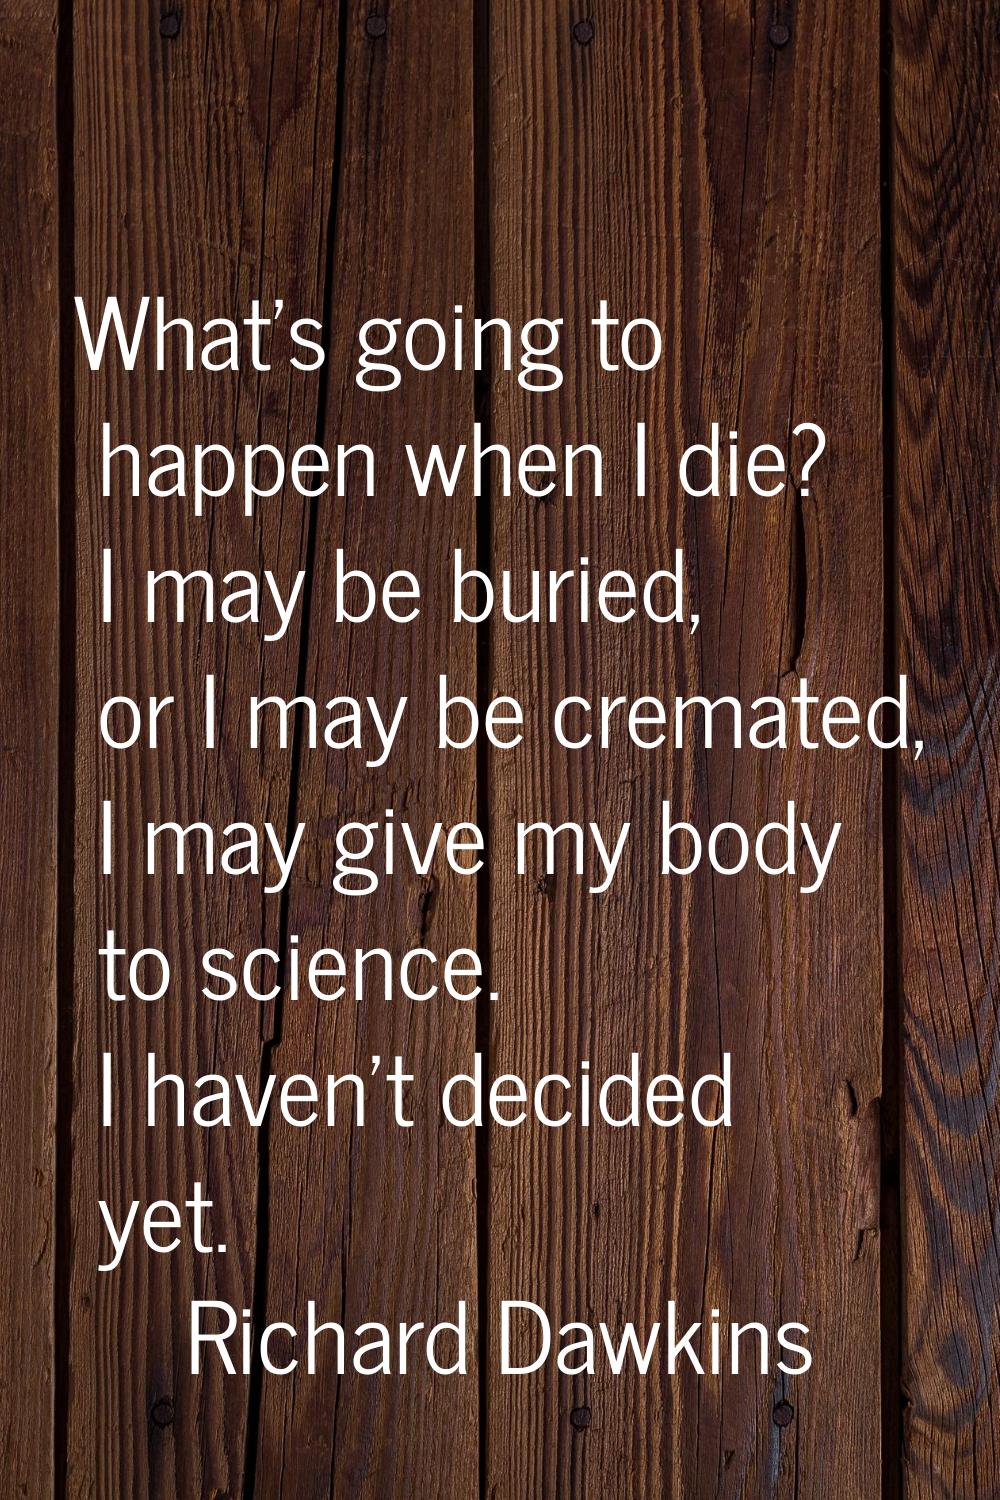 What's going to happen when I die? I may be buried, or I may be cremated, I may give my body to sci